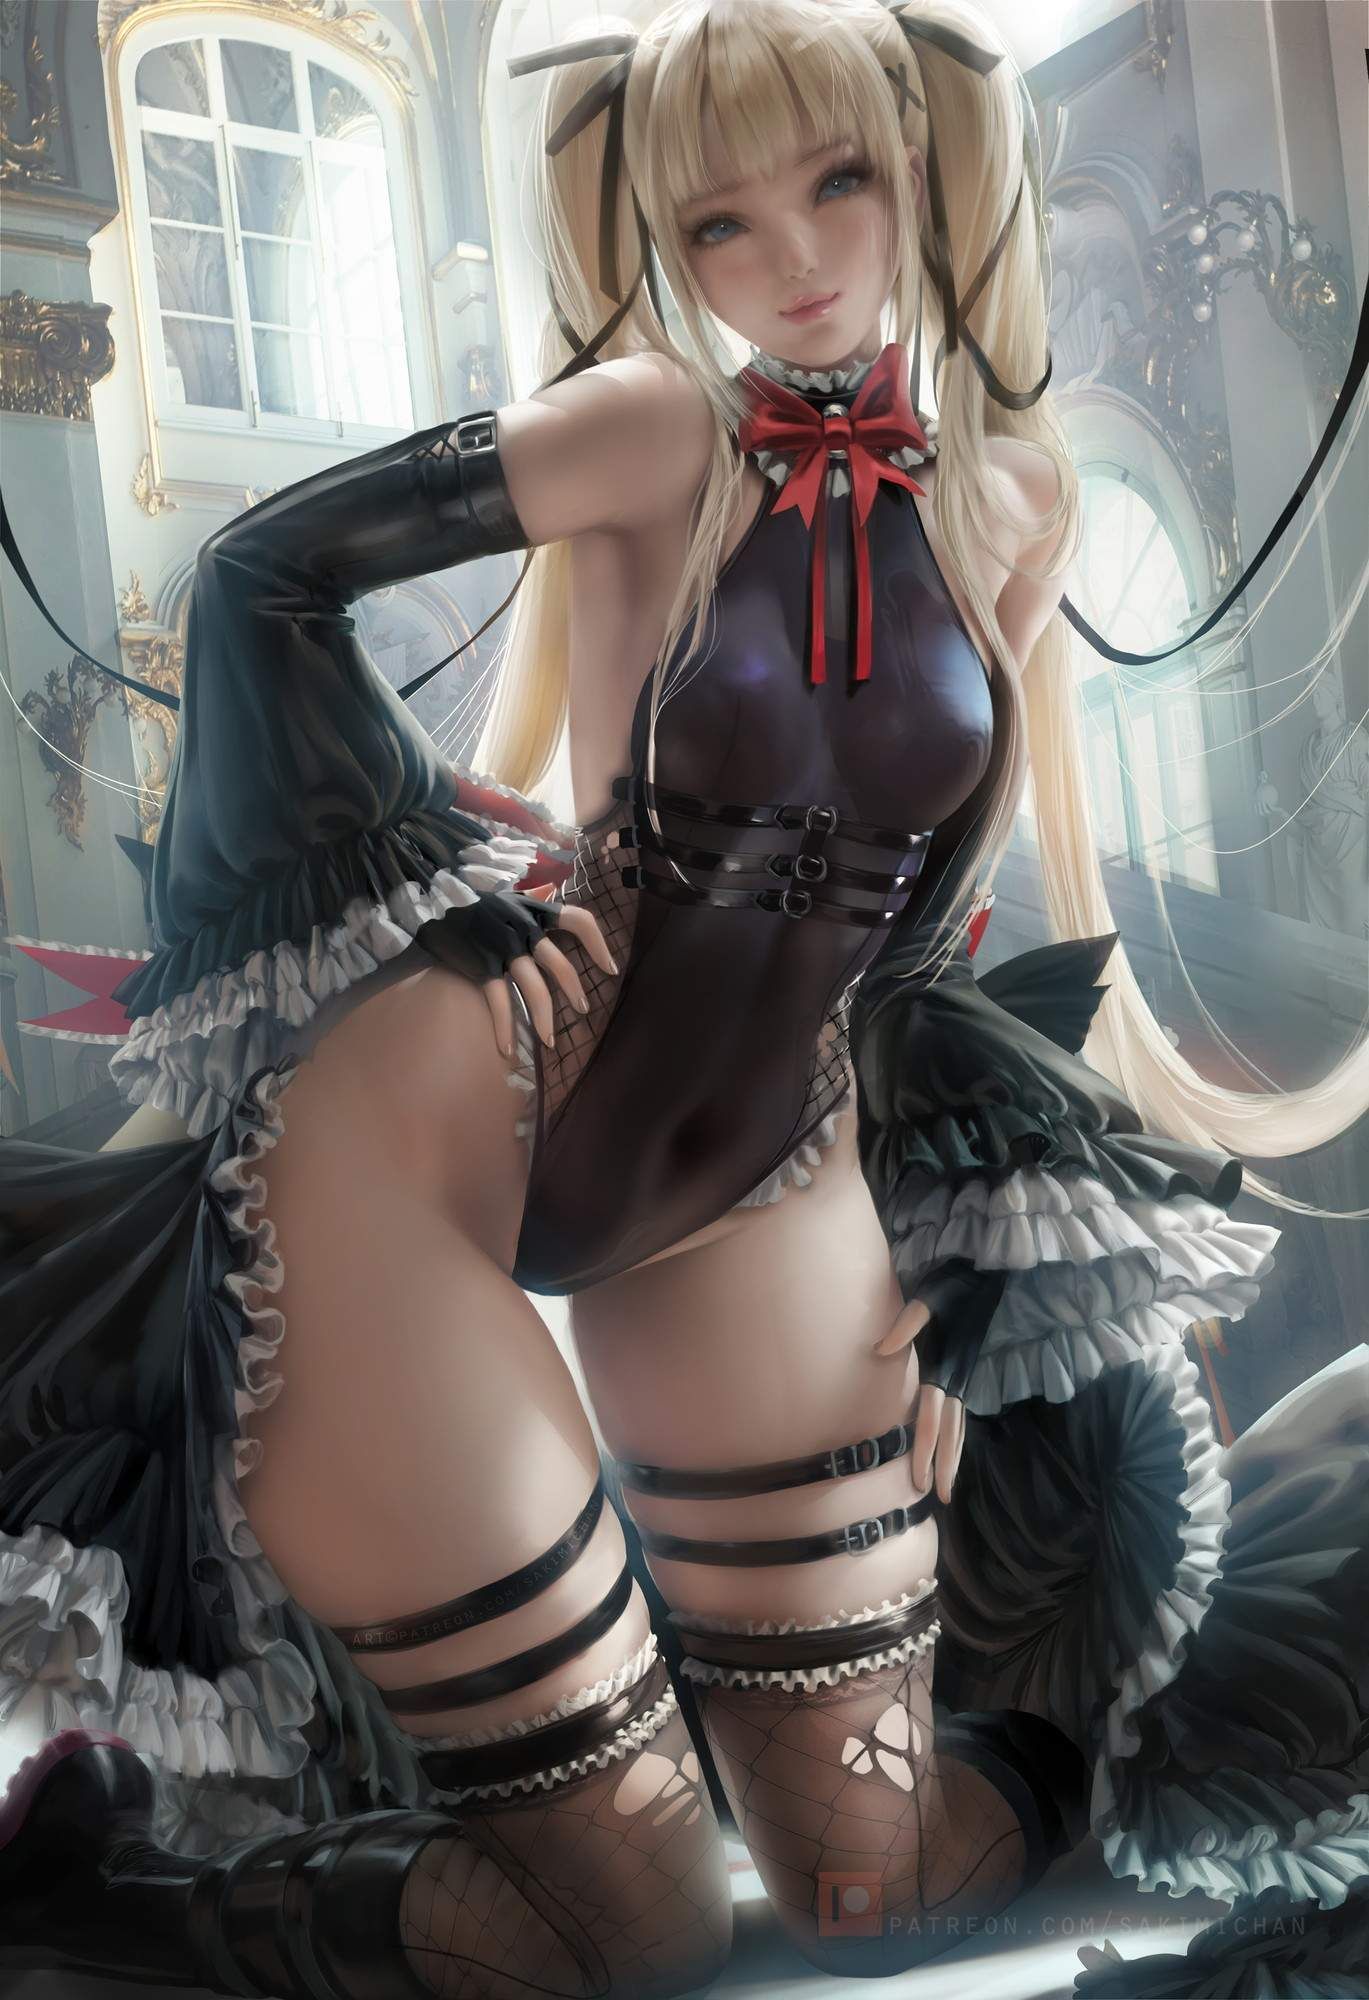 Dead or Alive Erotic Cartoon Marie Rose's service S ●X immediately pulls out! - Saddle! 4